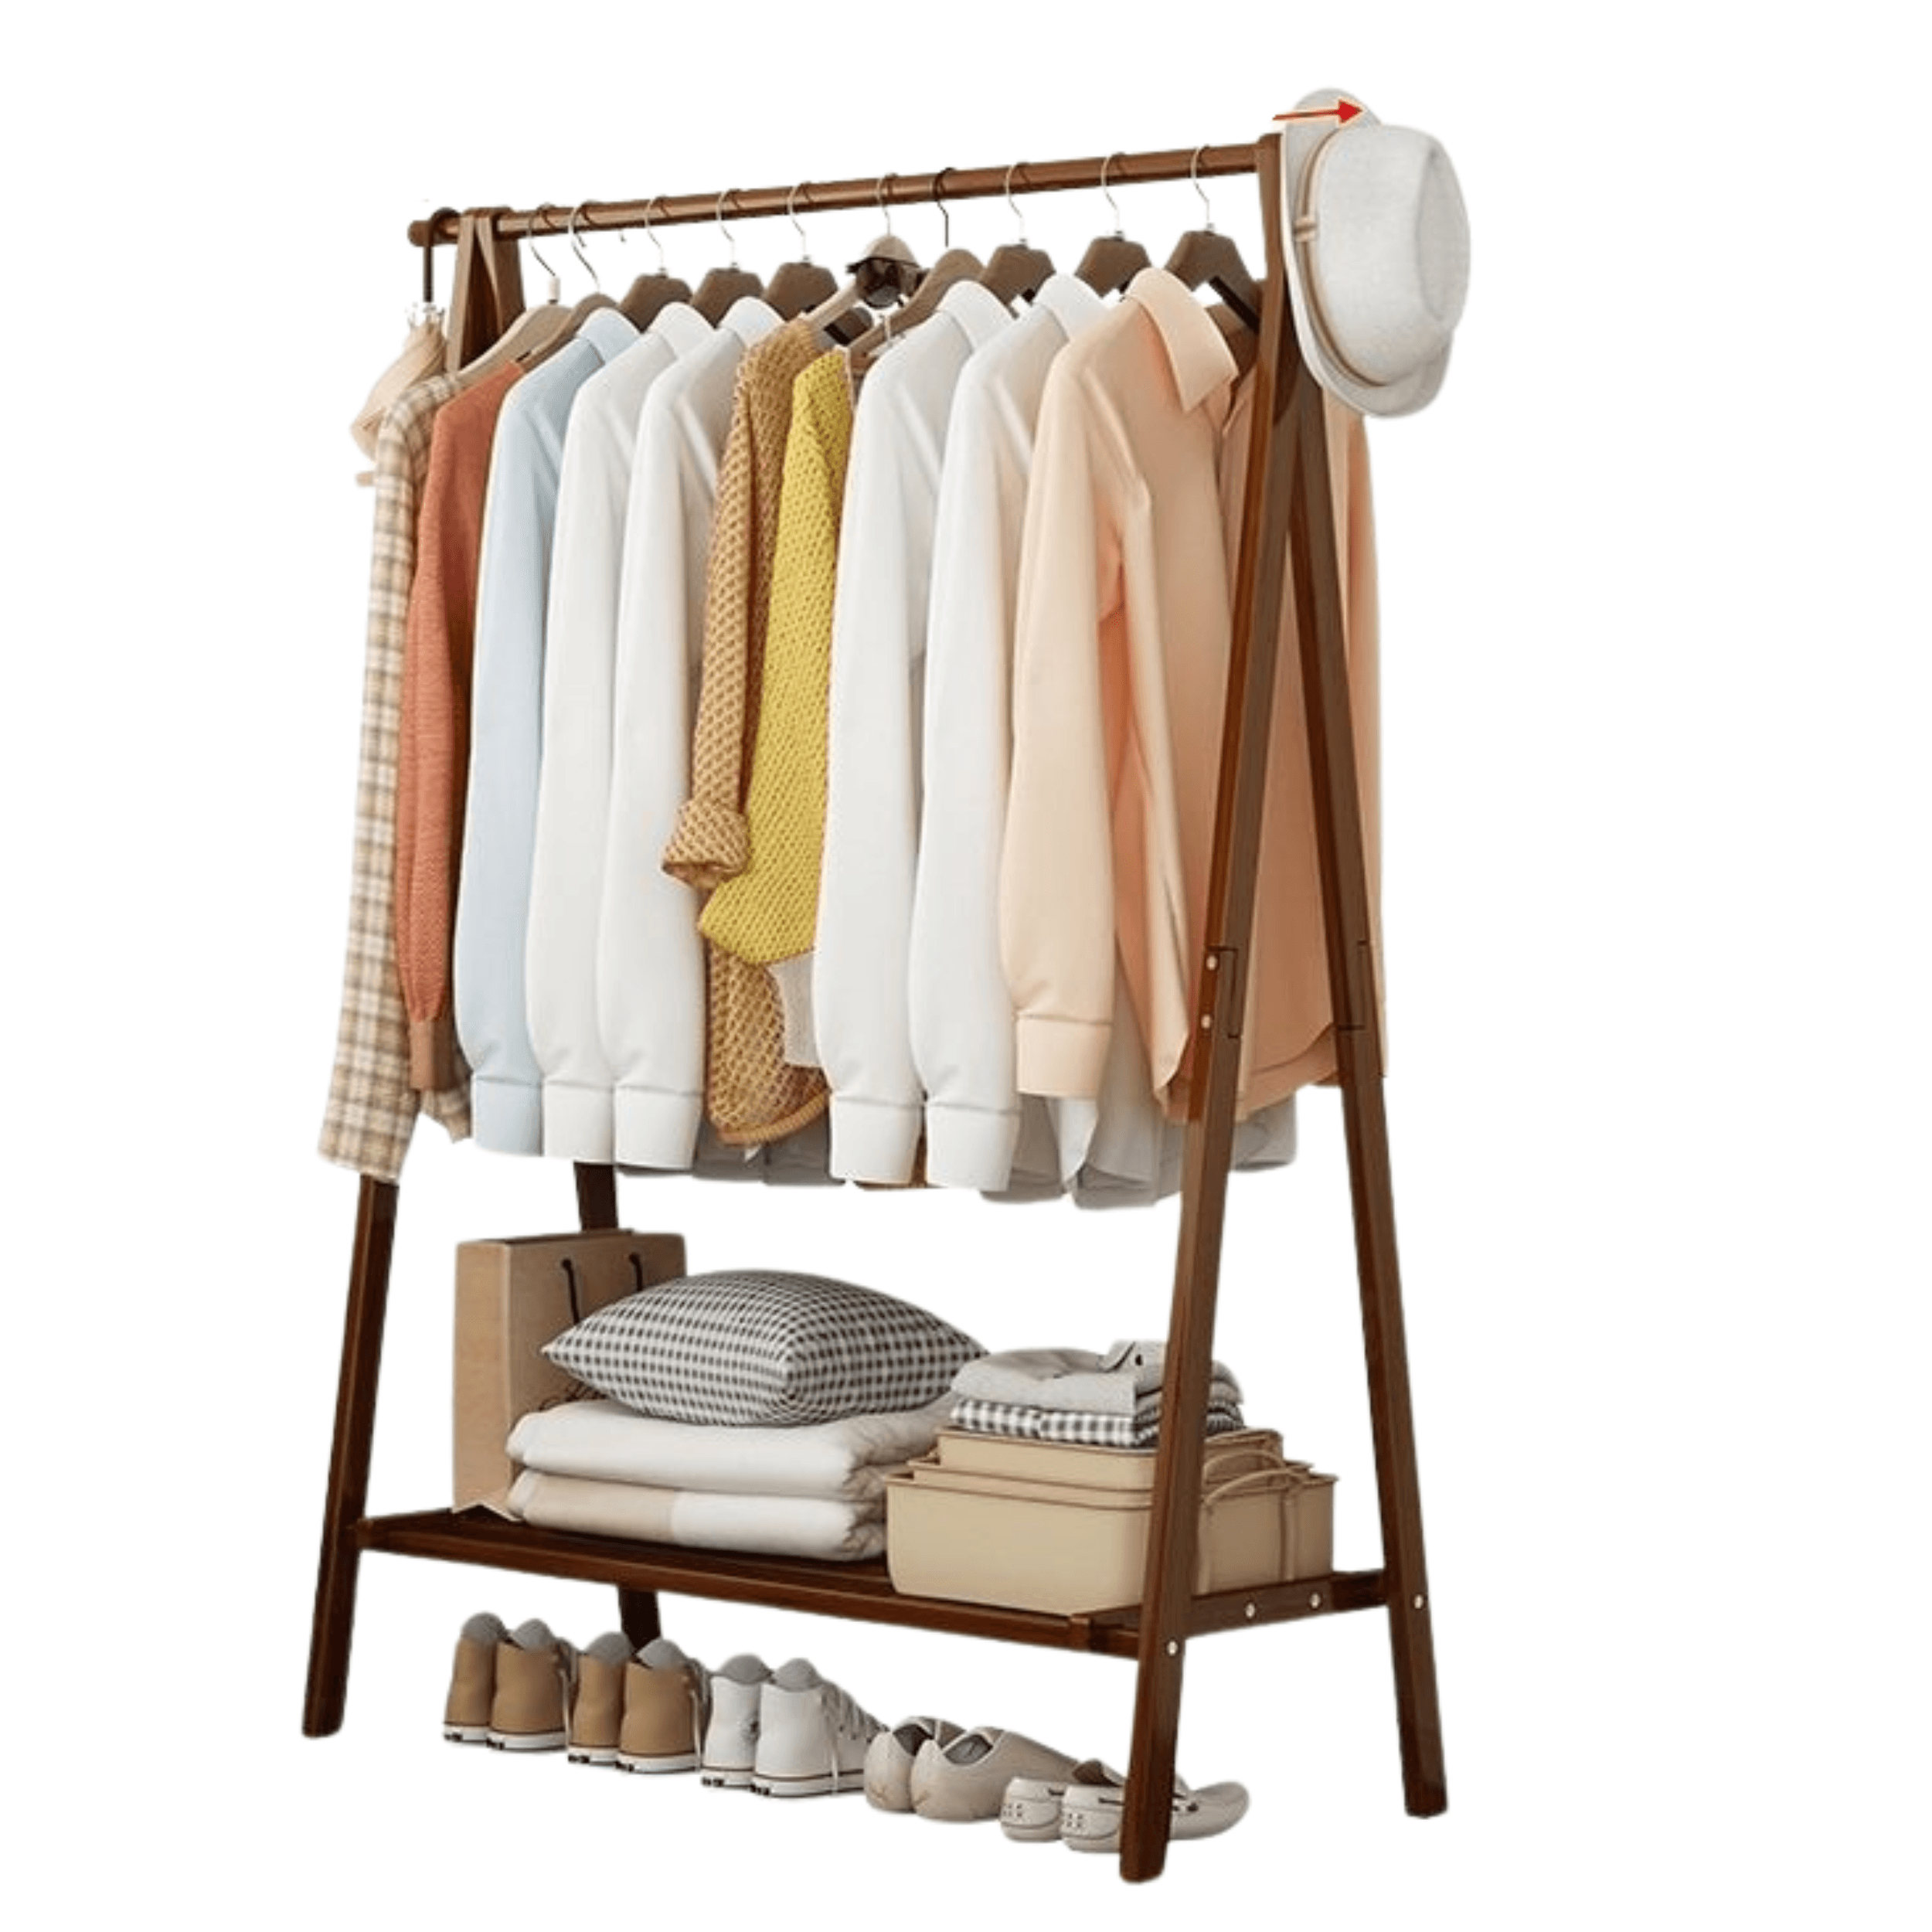 Folding bamboo free-standing trapezoidal coat rack with a shelf at the bottom, 100 cm length